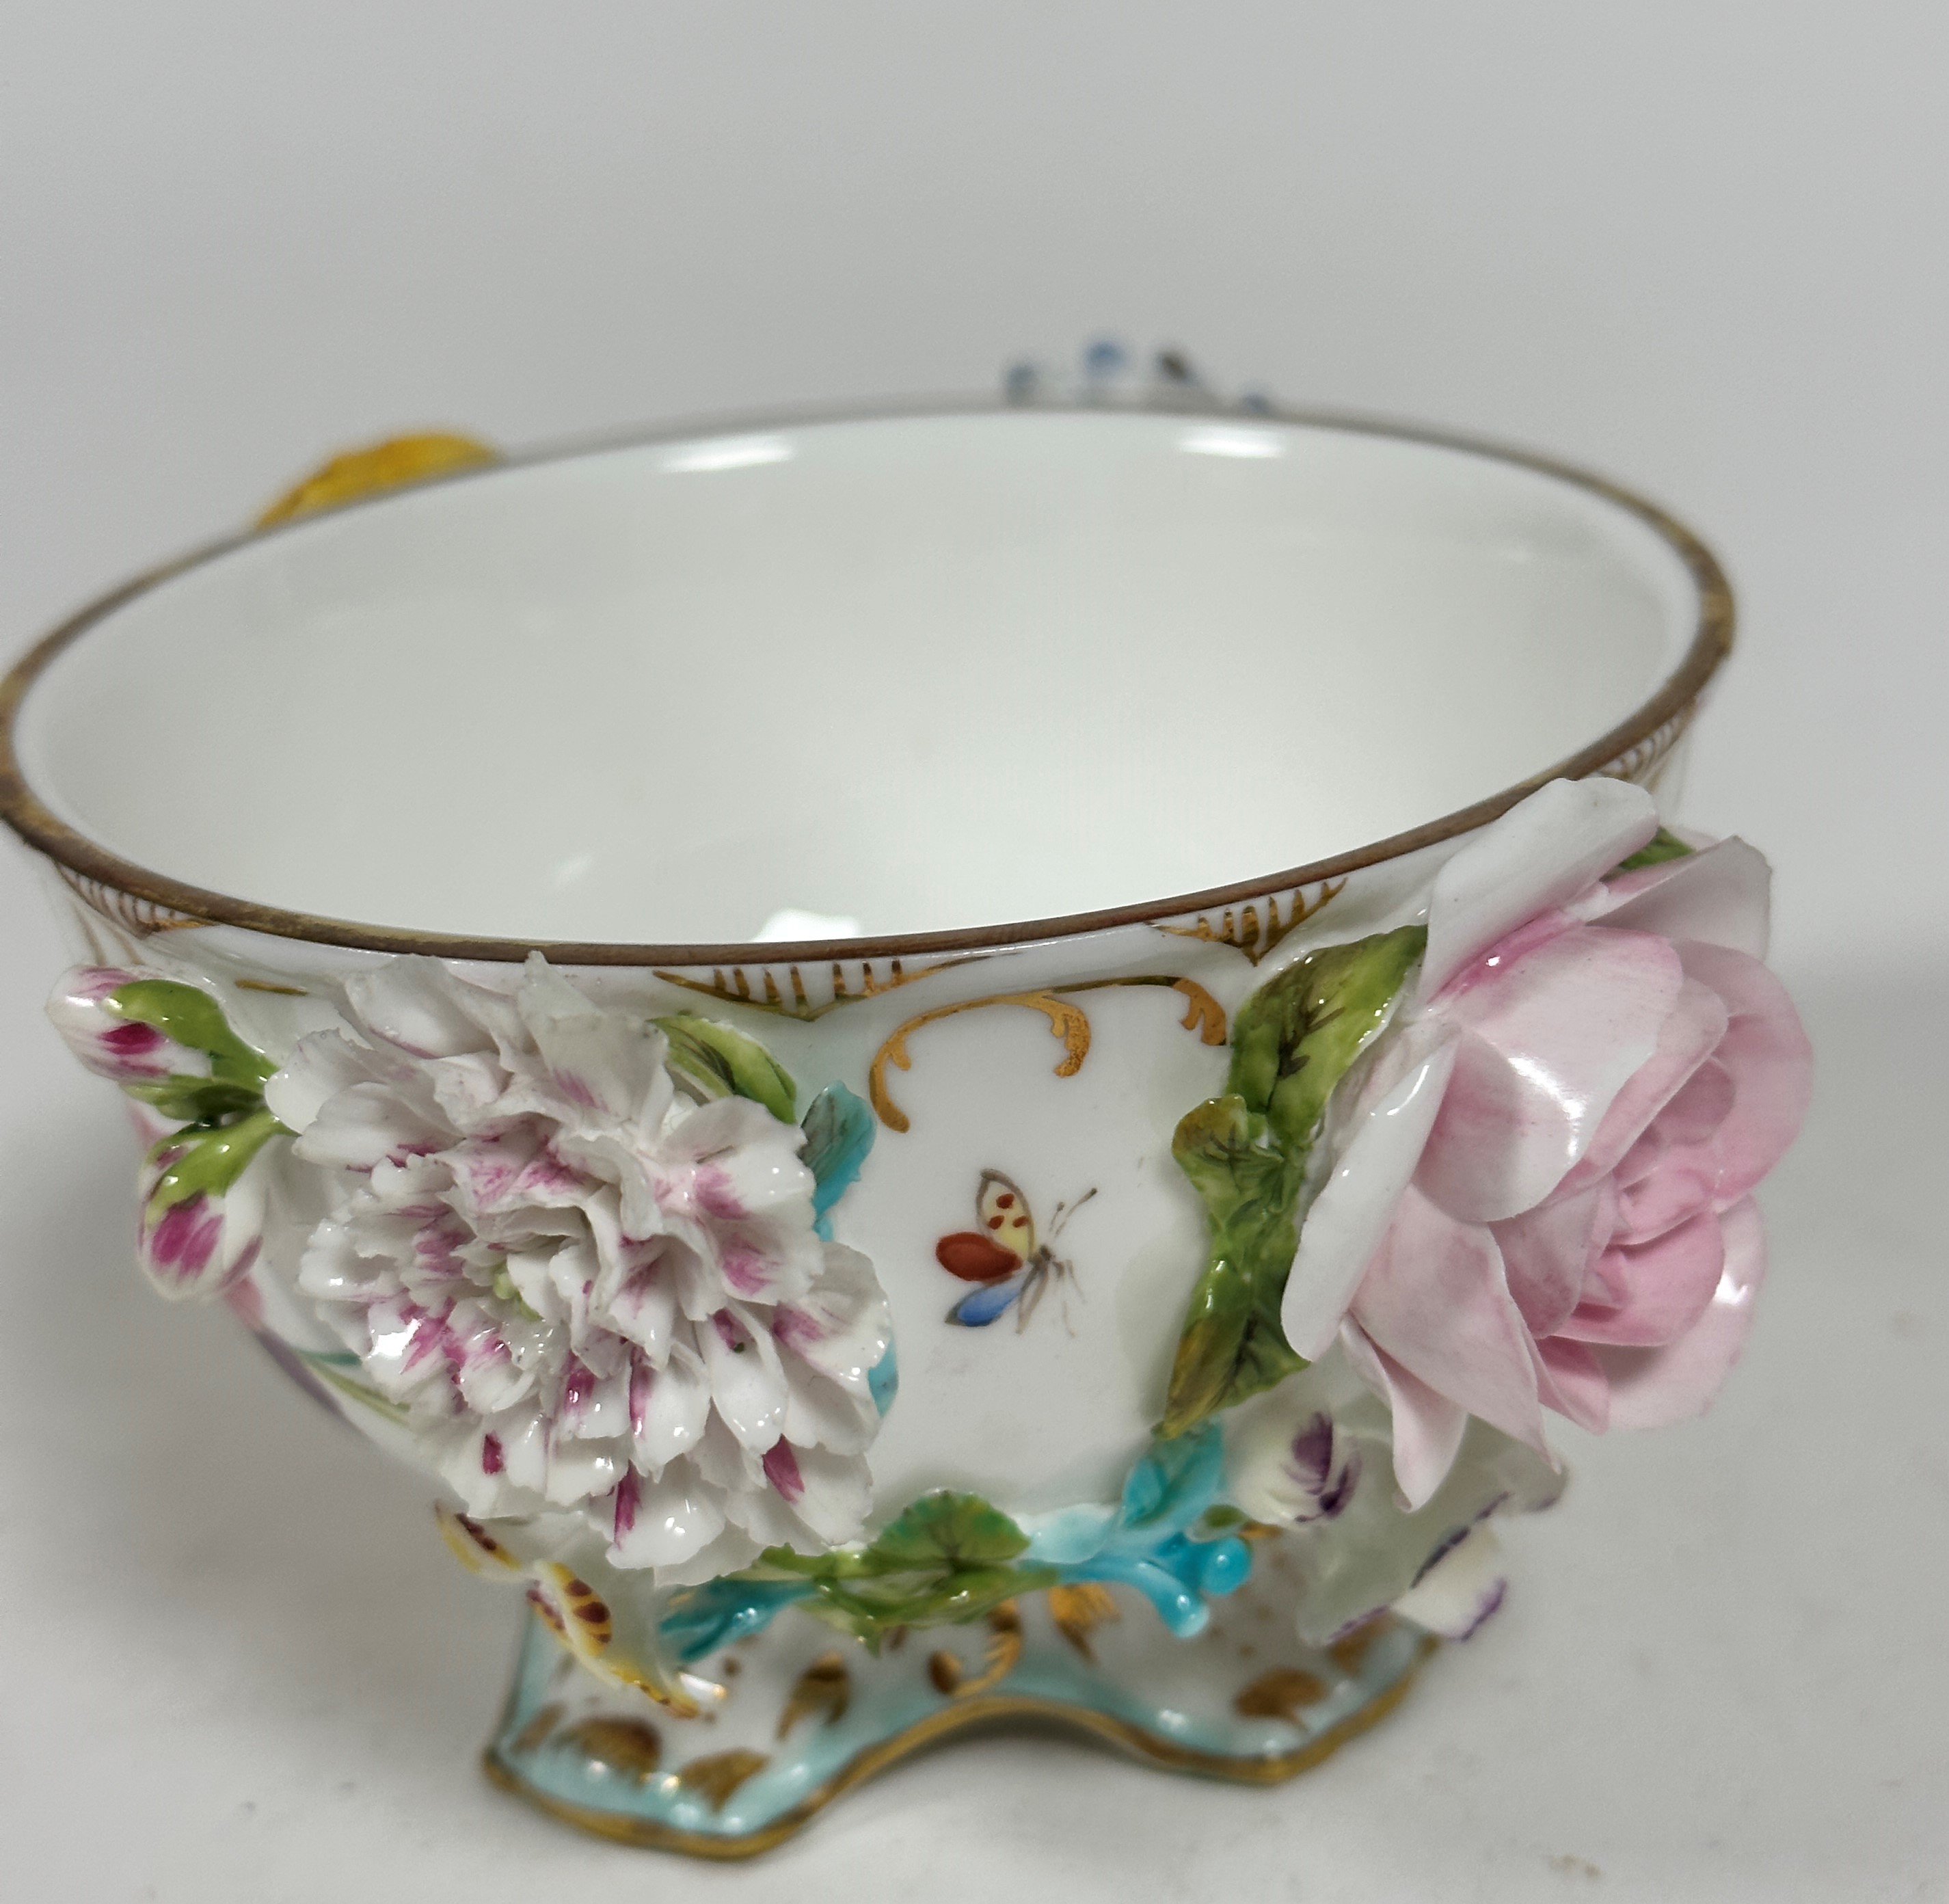 A Coalport Coalbrookdale posy dish and cover decorated in the Coalbrookdale style with floral - Image 6 of 7